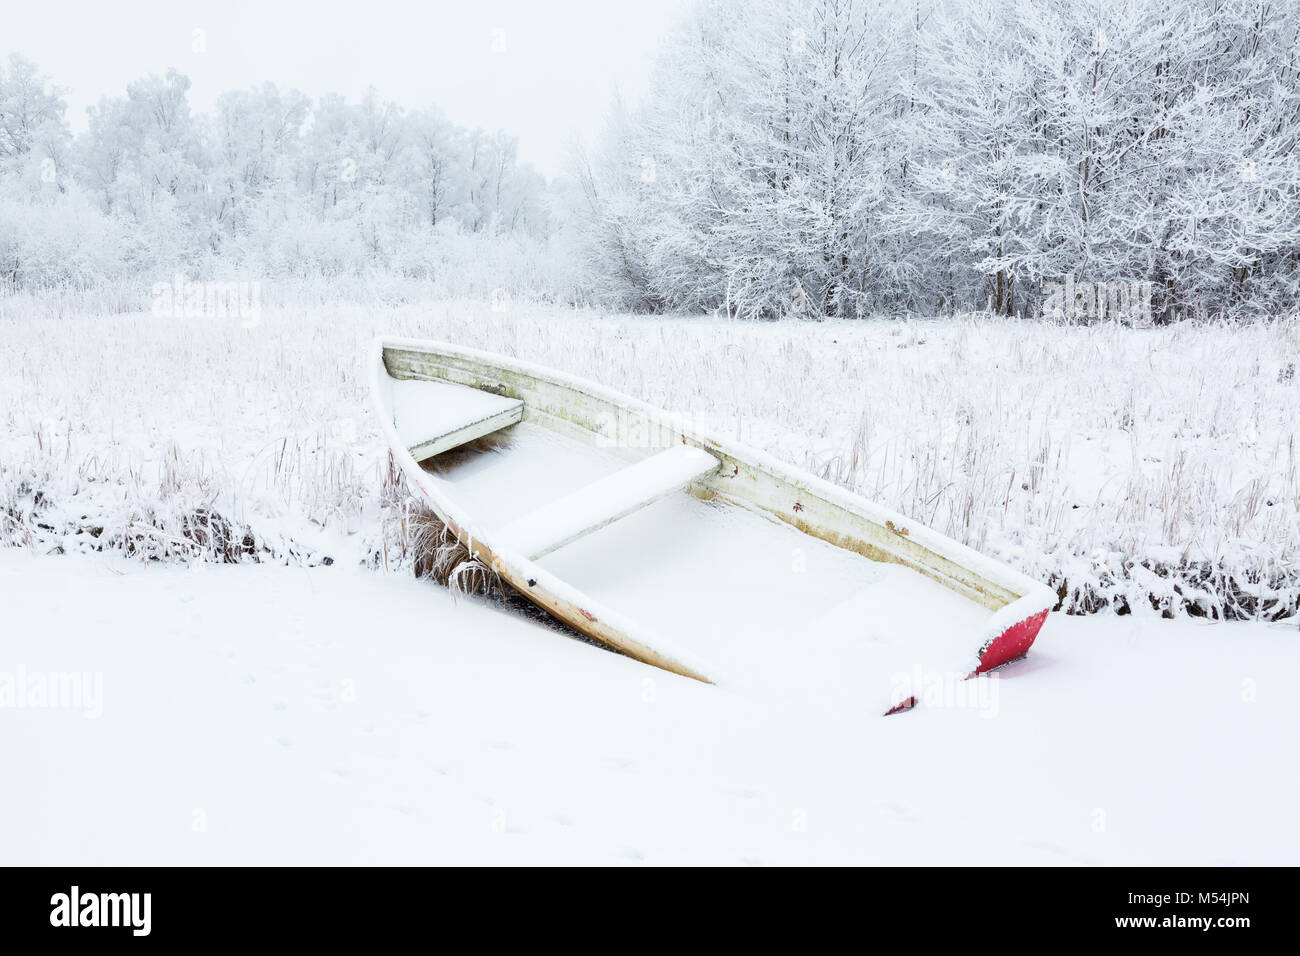 Rowing boat on the beach in snowy scenes Stock Photo